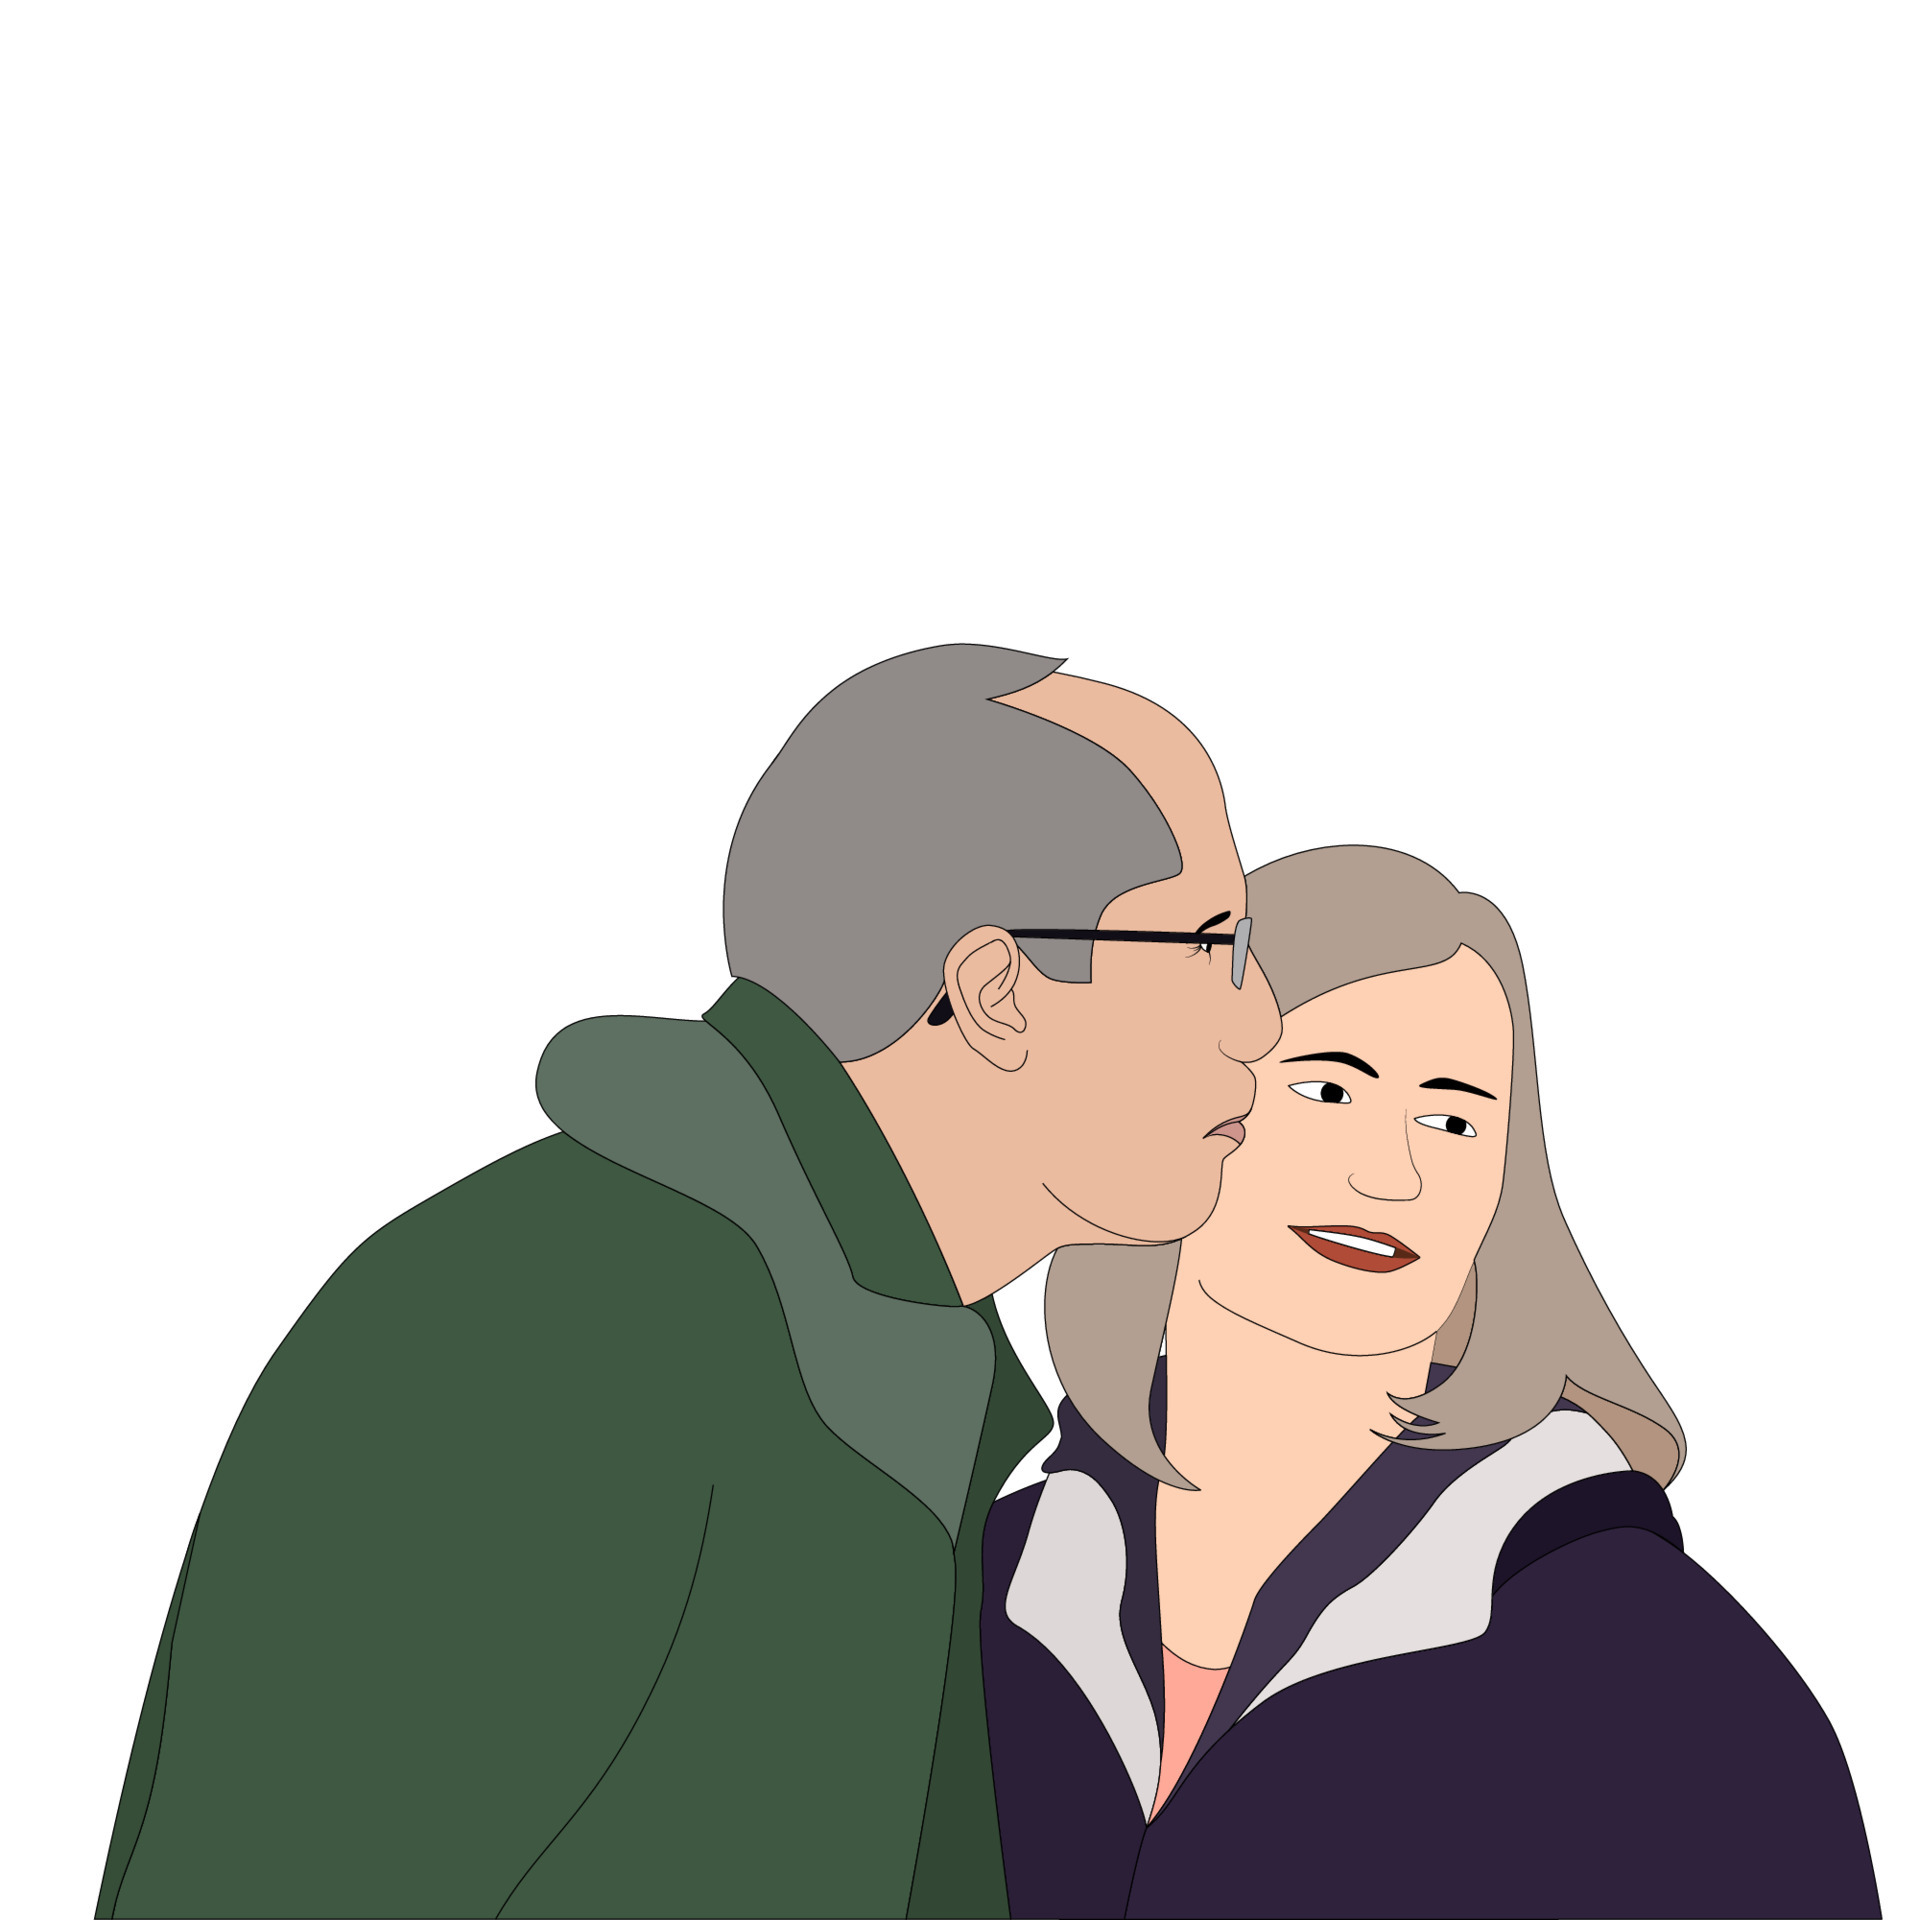 Happy Valentines Day, old man kissing old women character vector illustration on white background, Character illustration for couple theme projects like wedding and valentines pic